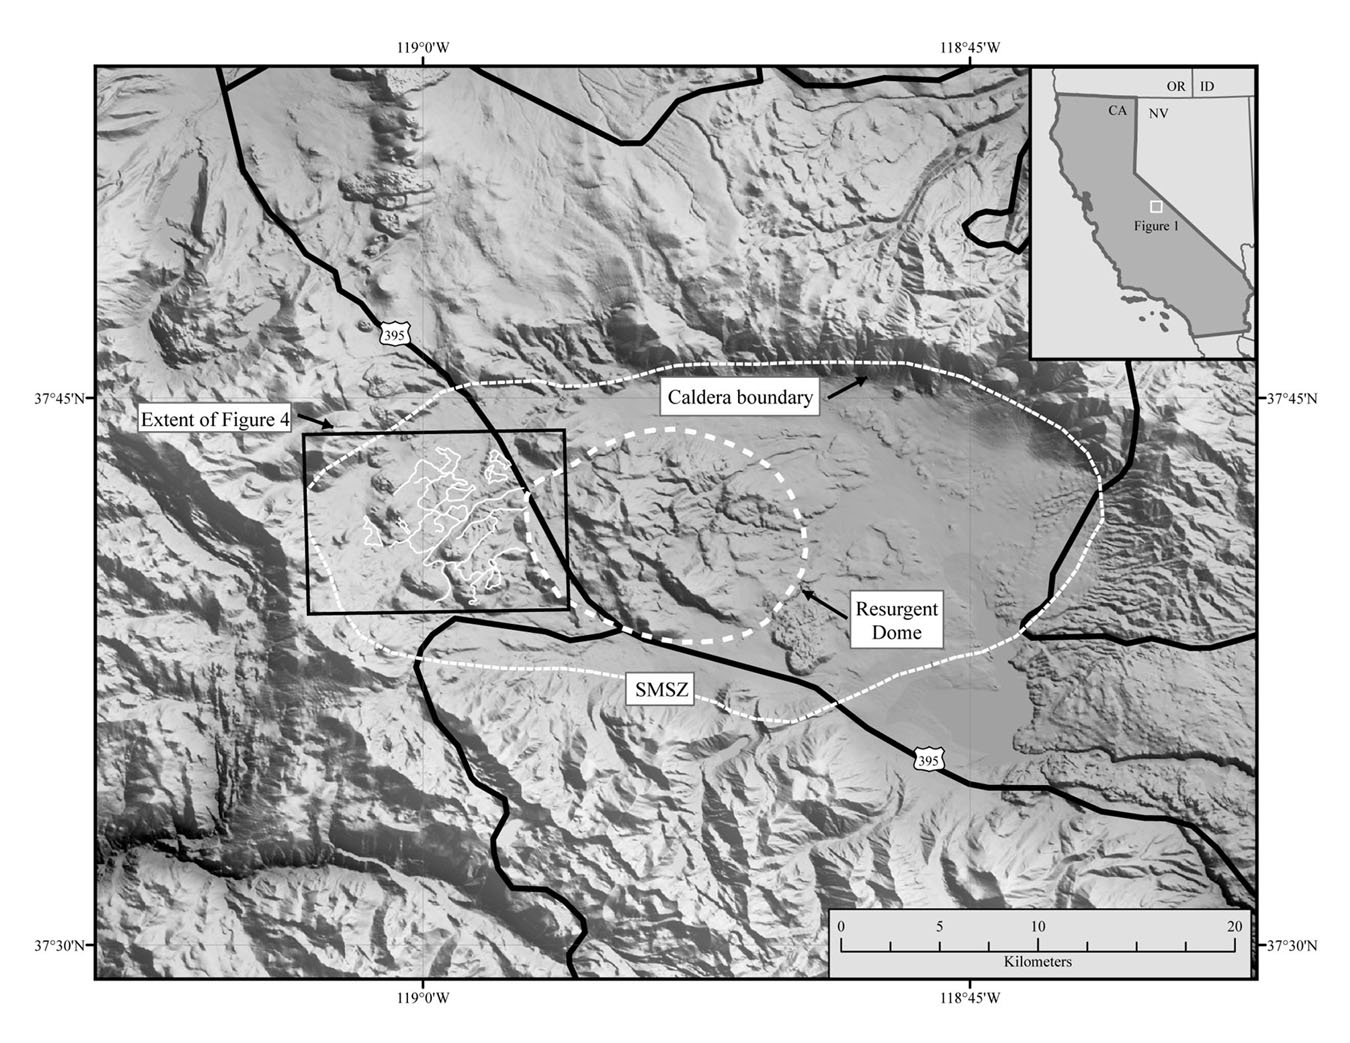 Figure 1 - Shaded relief image of the Long Valley Caldera, California